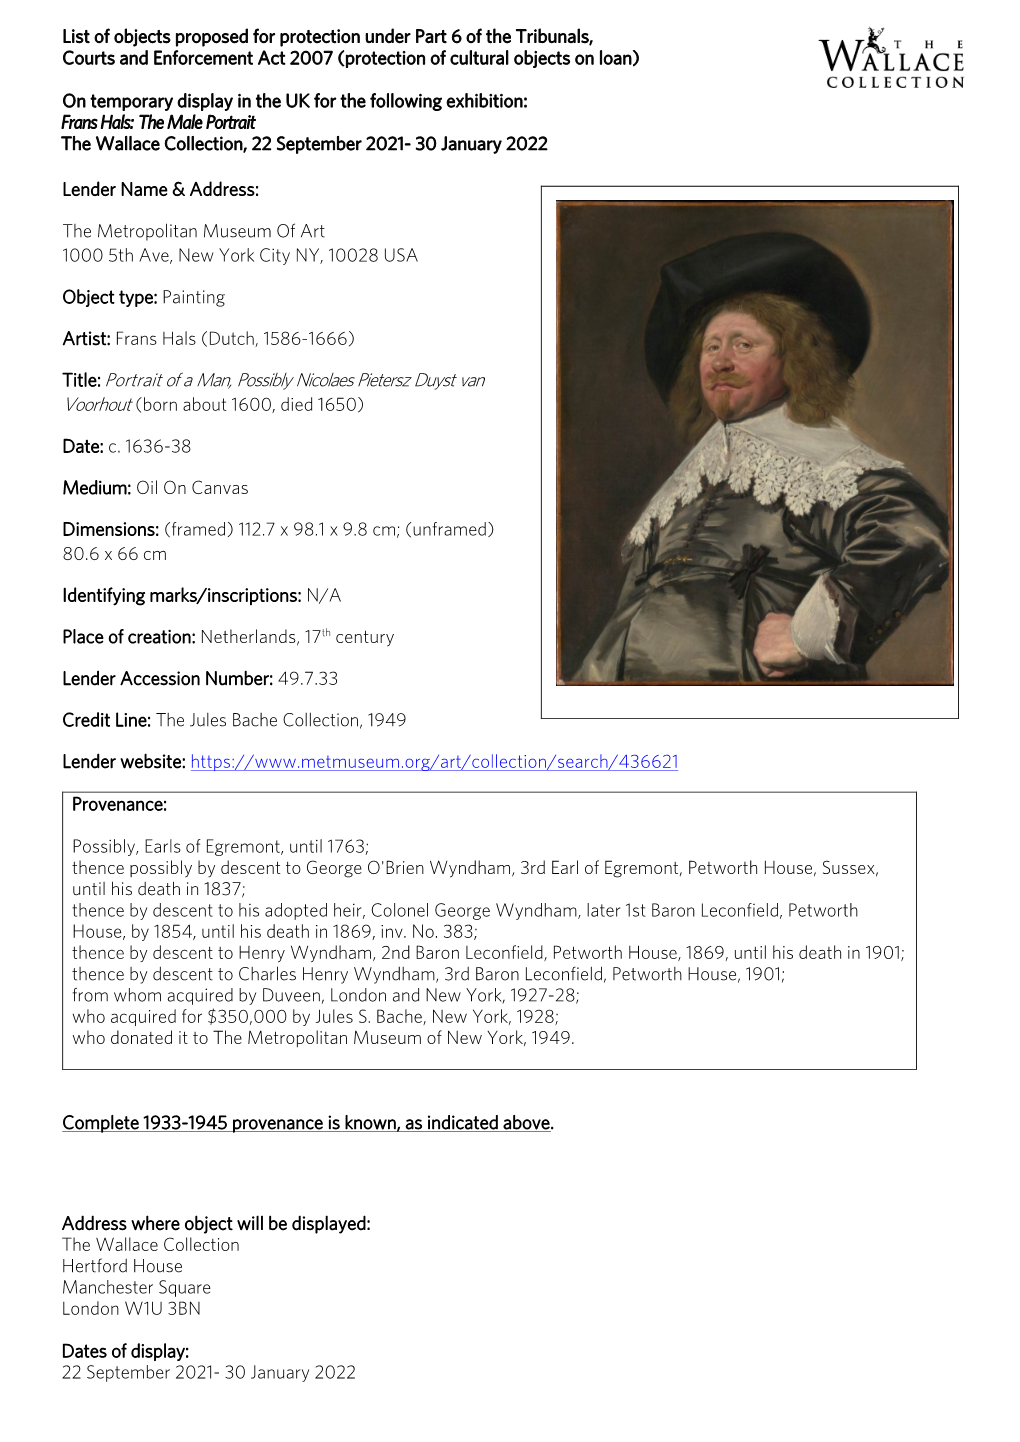 Frans Hals: the Male Portrait the Wallace Collection, 22 September 2021- 30 January 2022